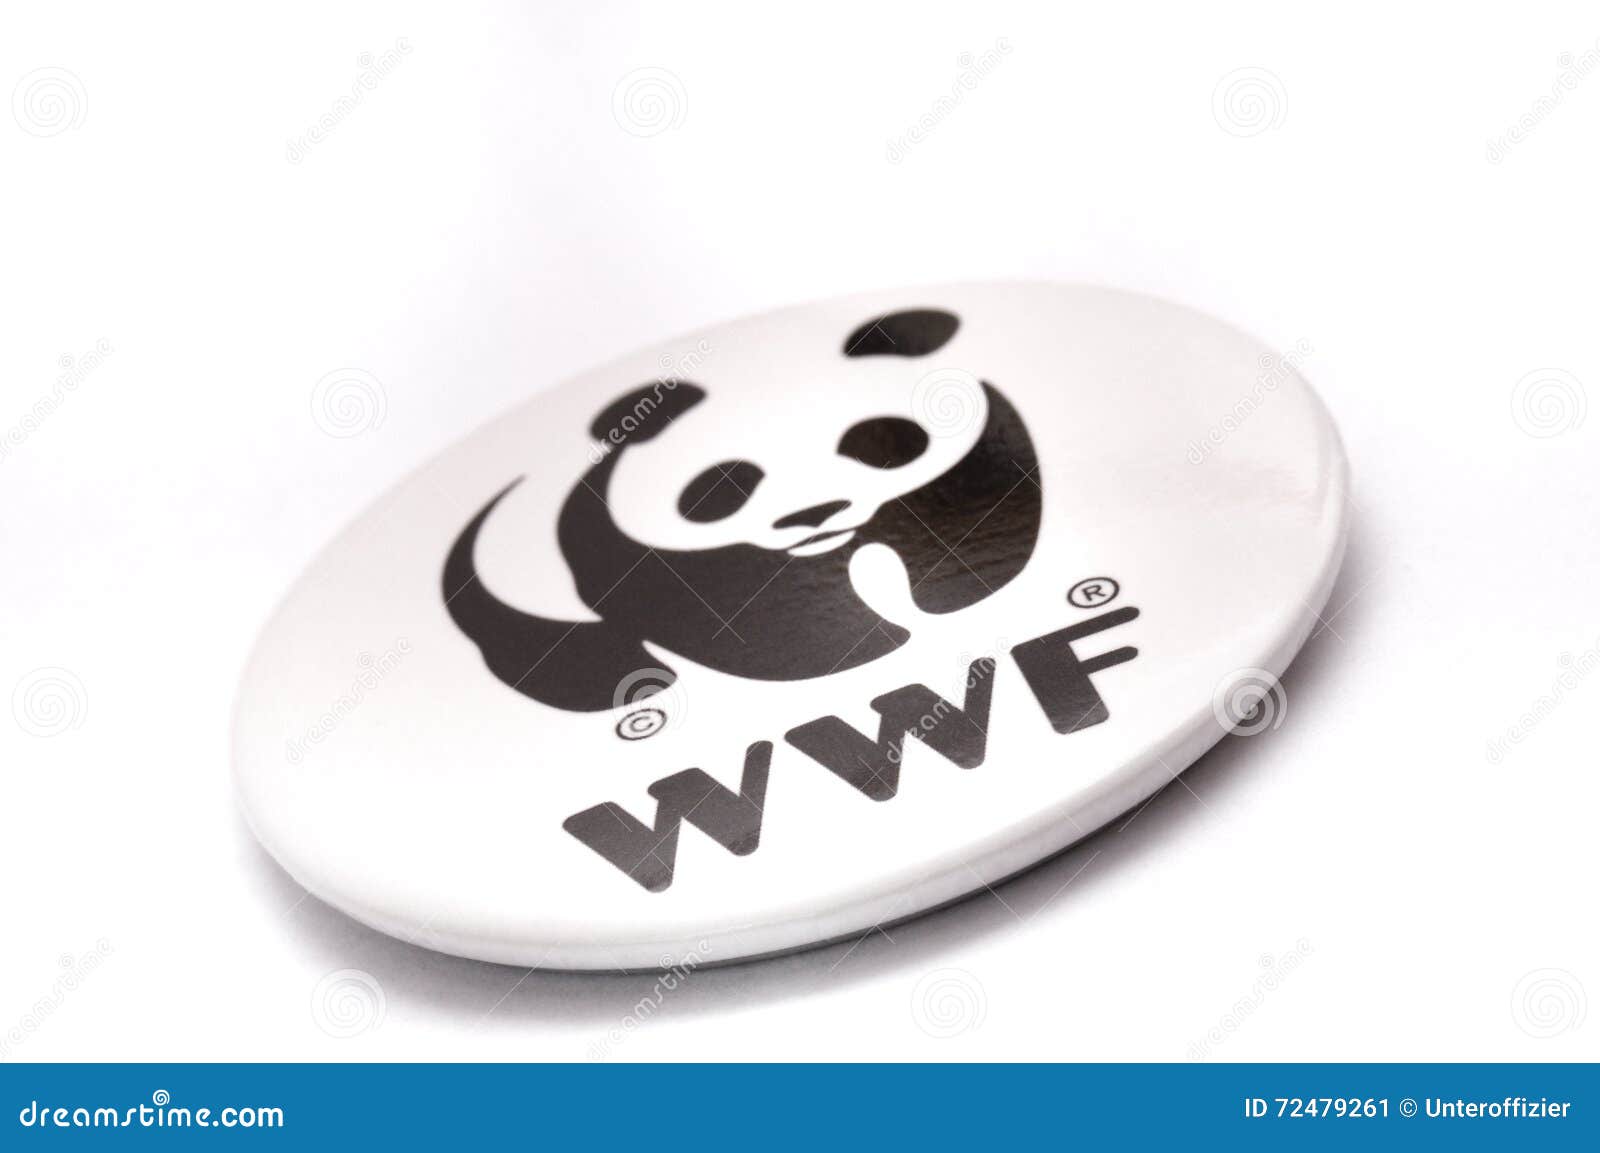 Wide Fund for Nature Pin-Back Button Badge Editorial Photo - Image of wide, insignia: 72479261